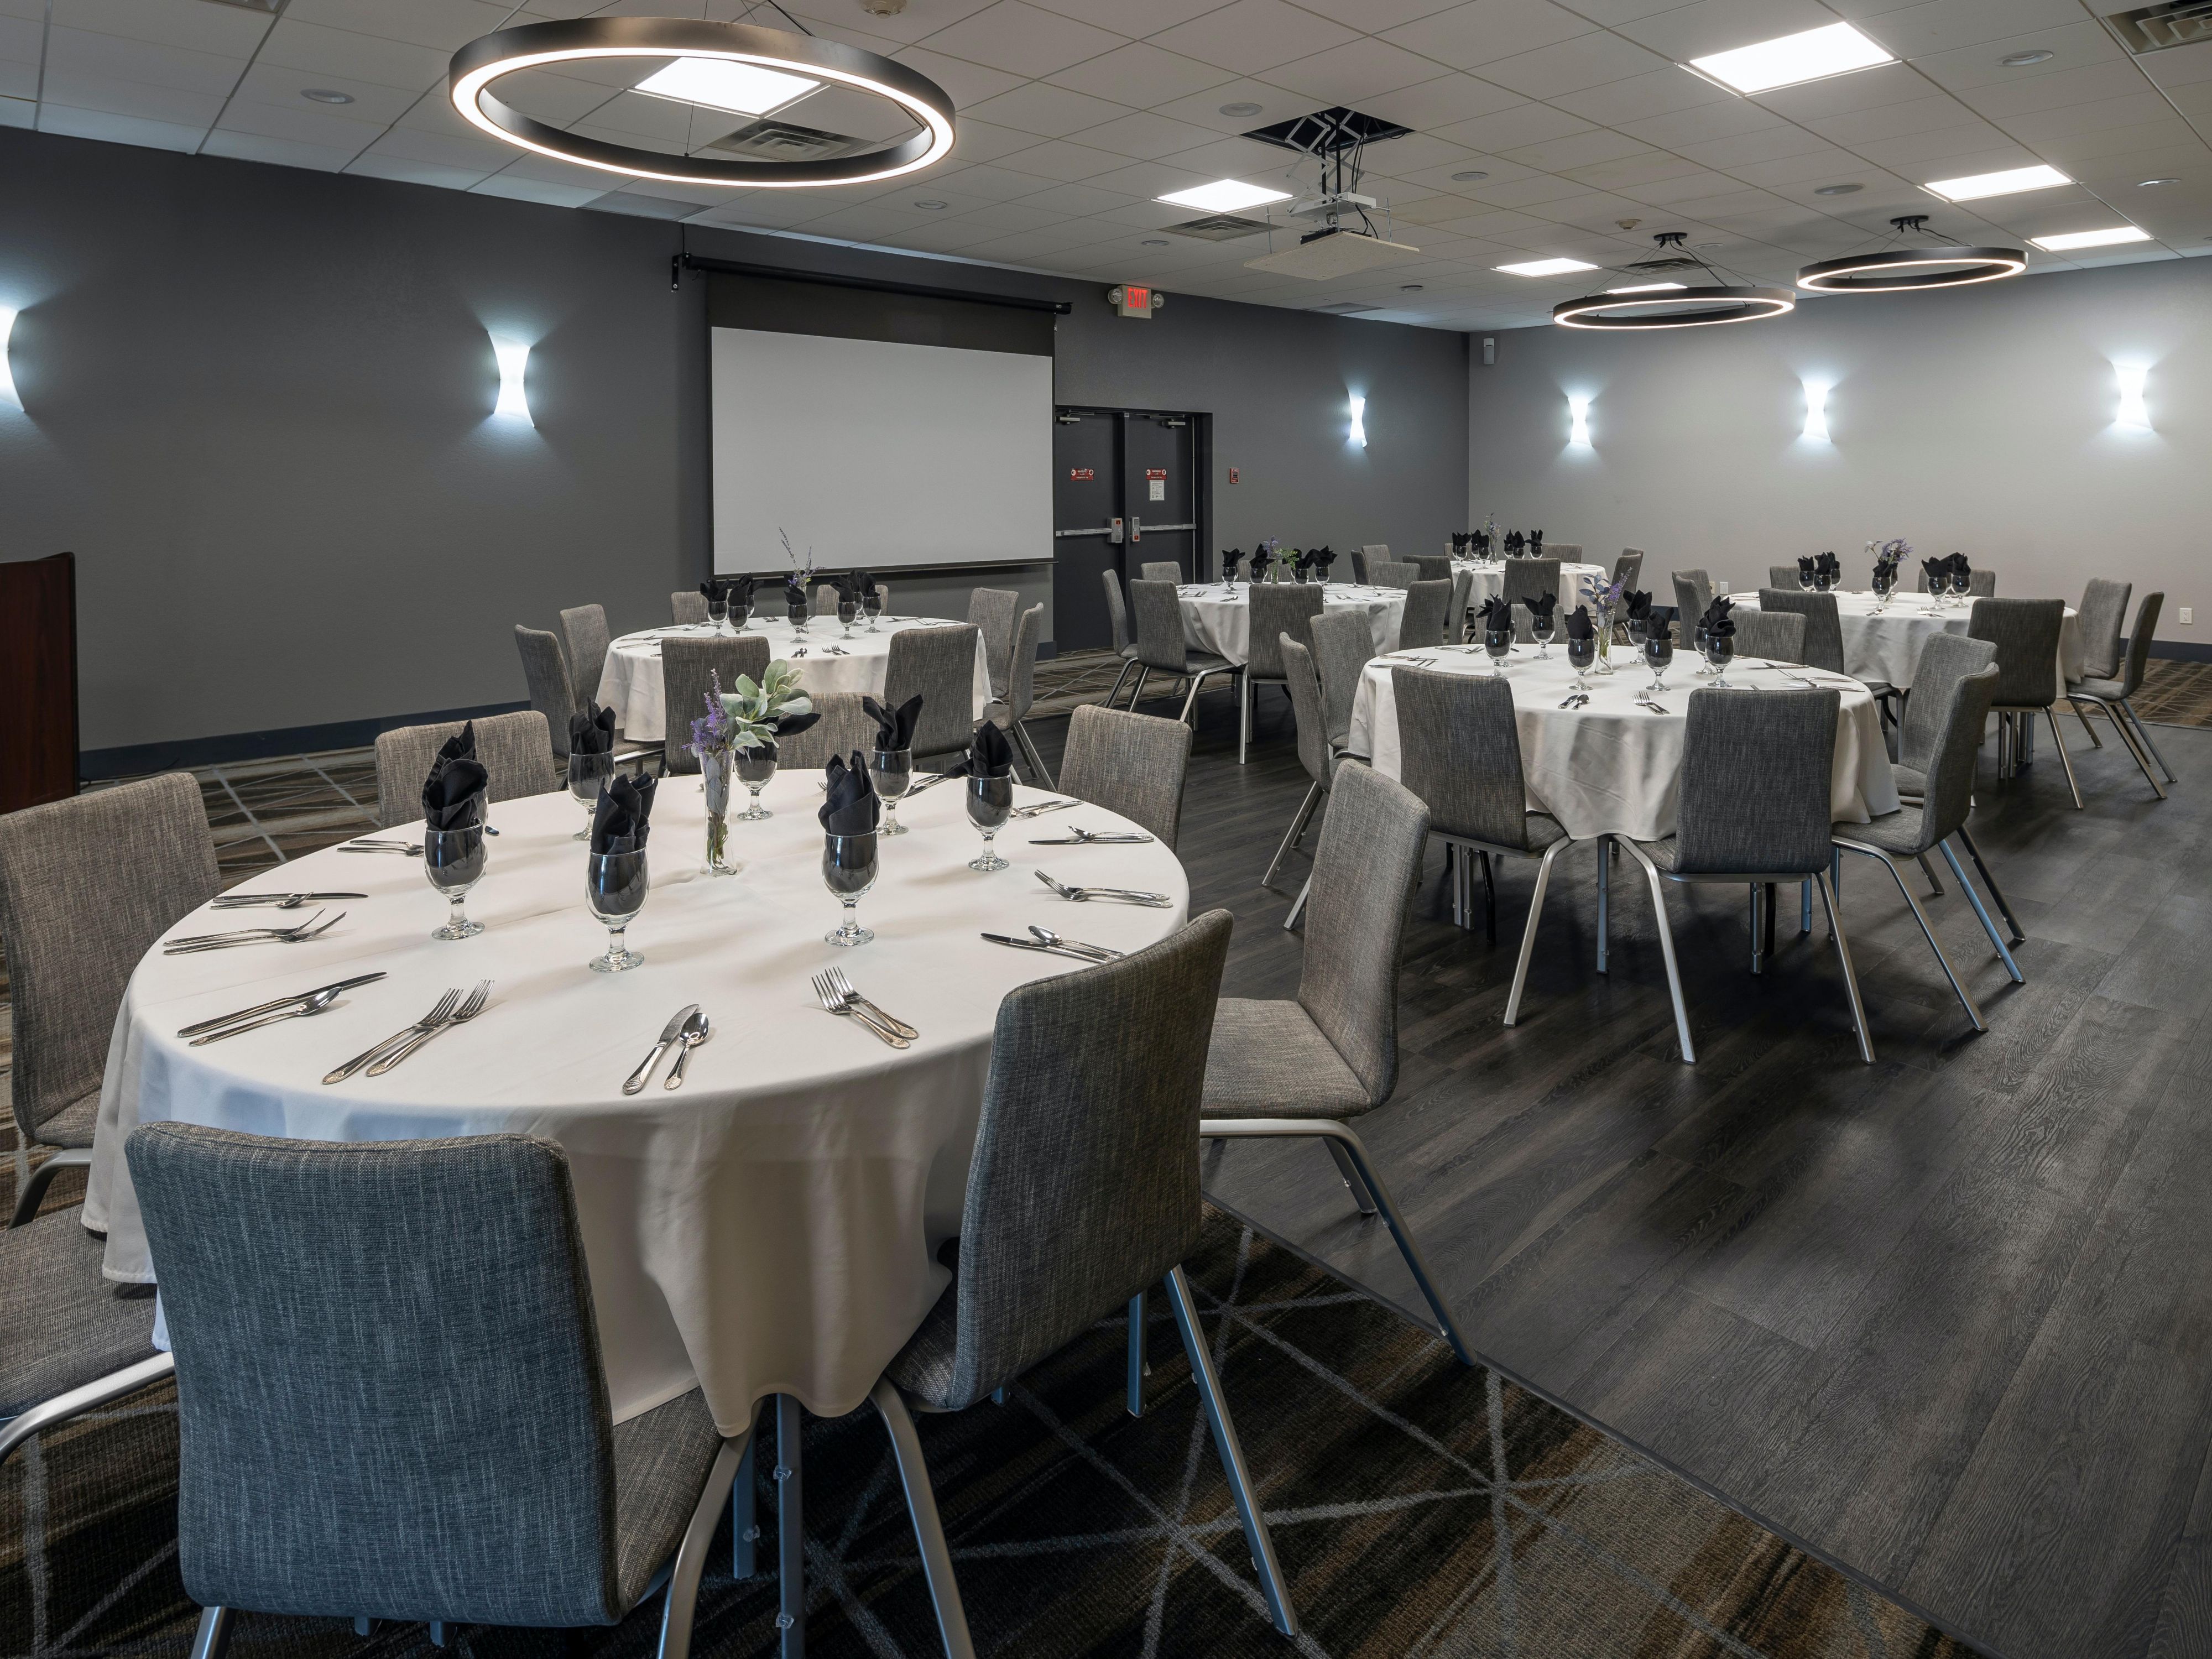 We have five meeting rooms that total 3,150 square feet and such amenities as a piano, a professional events planner, A/V cart, screens and rentable projectors and more. We are ready to host any type of event, from a wedding to a corporate meeting to a sports team.  In-house catering only.